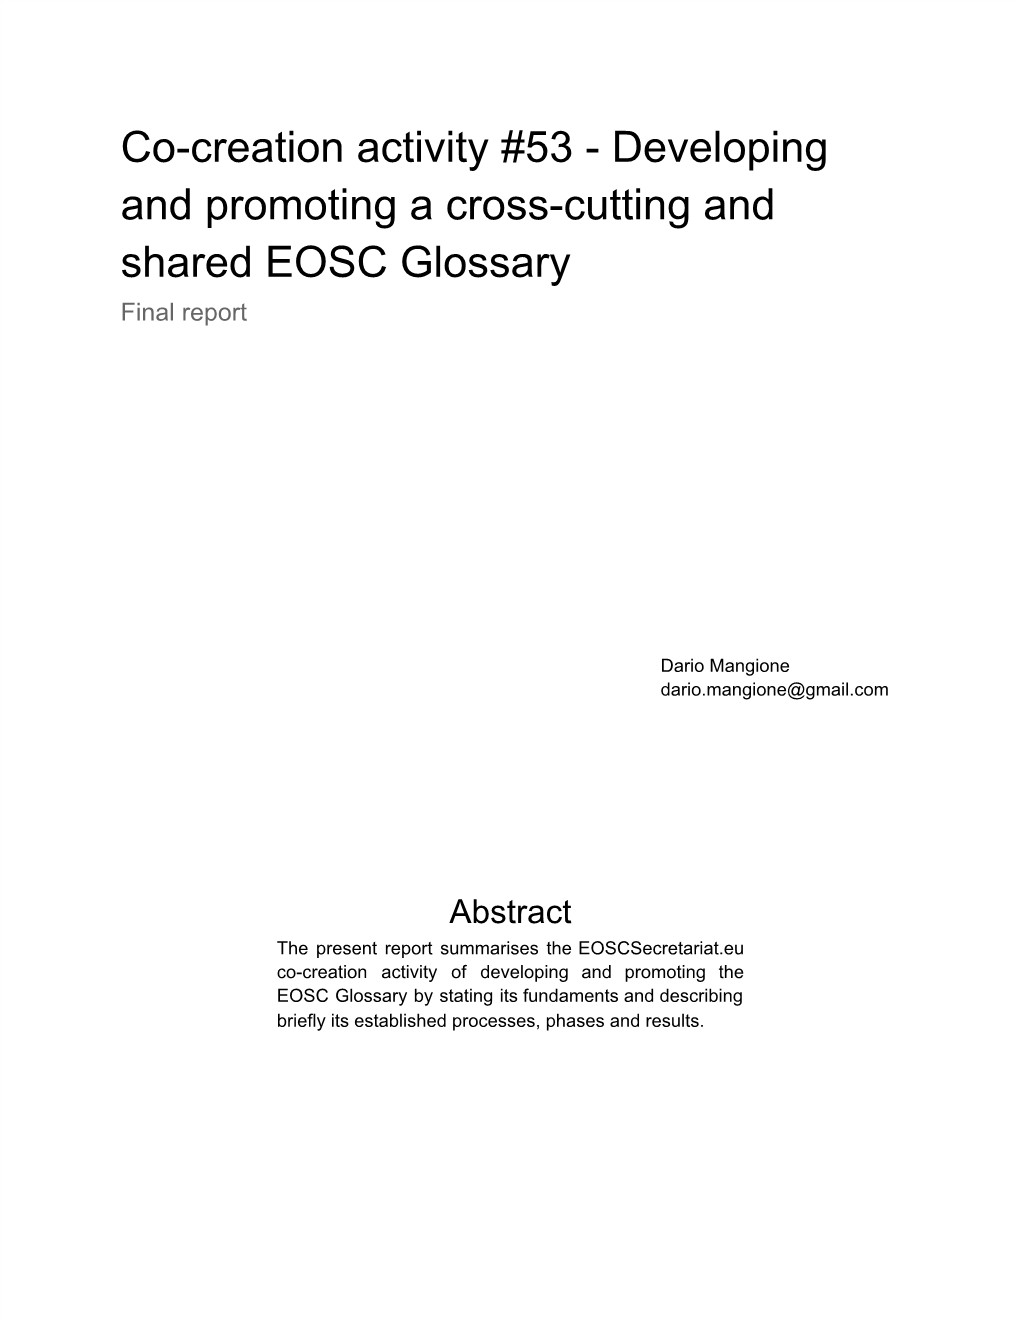 Co-Creation Activity #53 - Developing and Promoting a Cross-Cutting and Shared EOSC Glossary Final Report